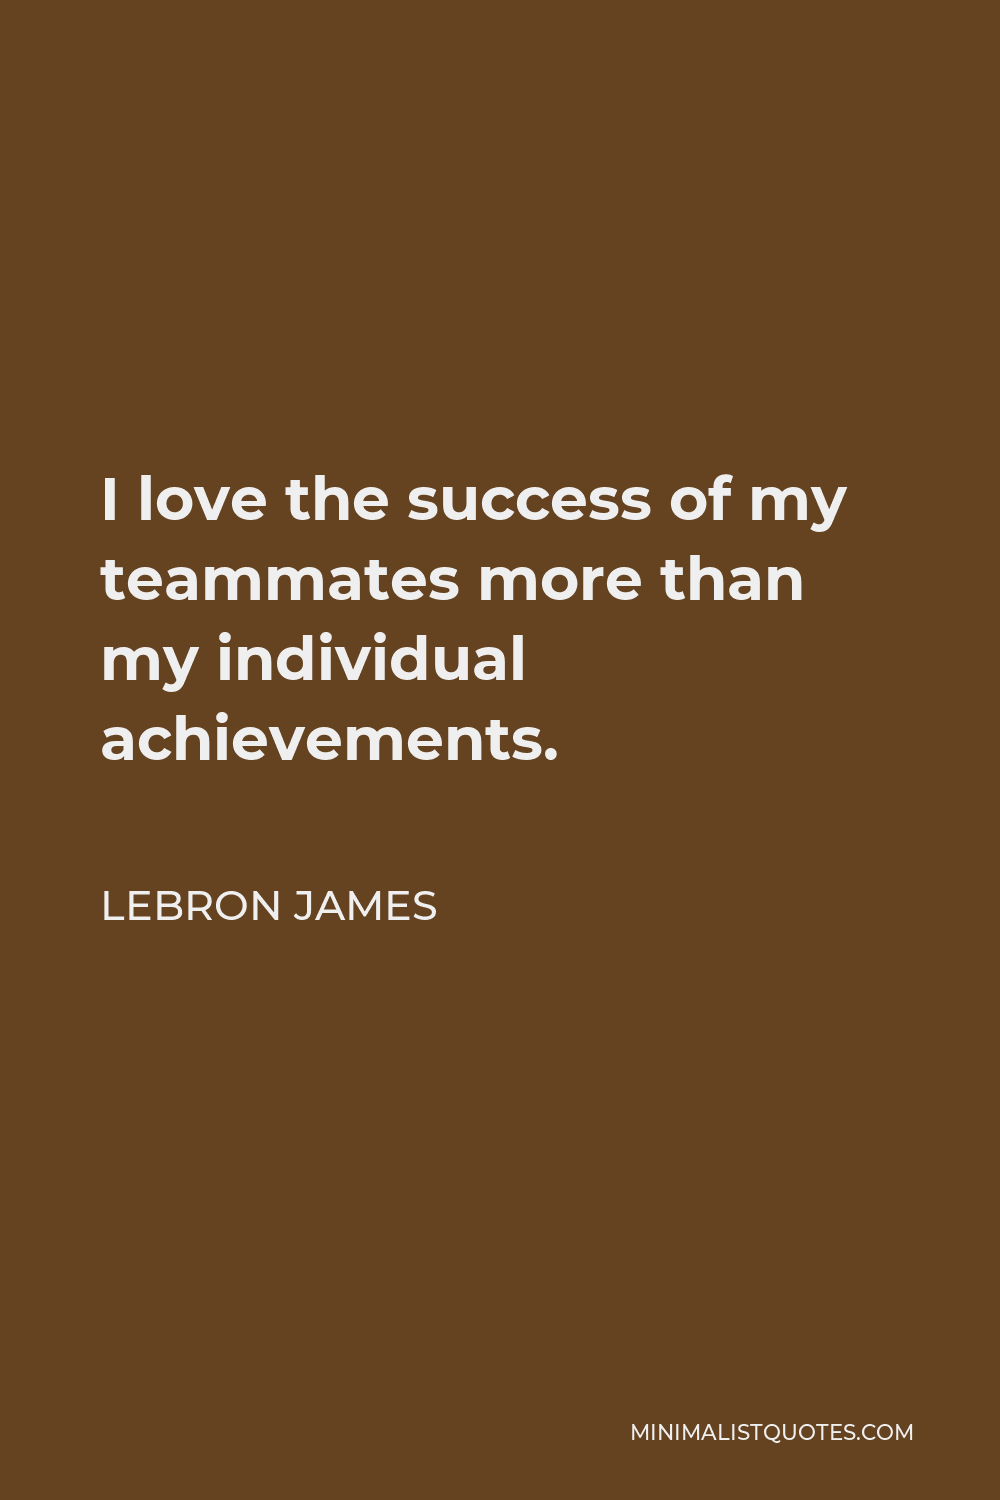 LeBron James Quote - I love the success of my teammates more than my individual achievements.